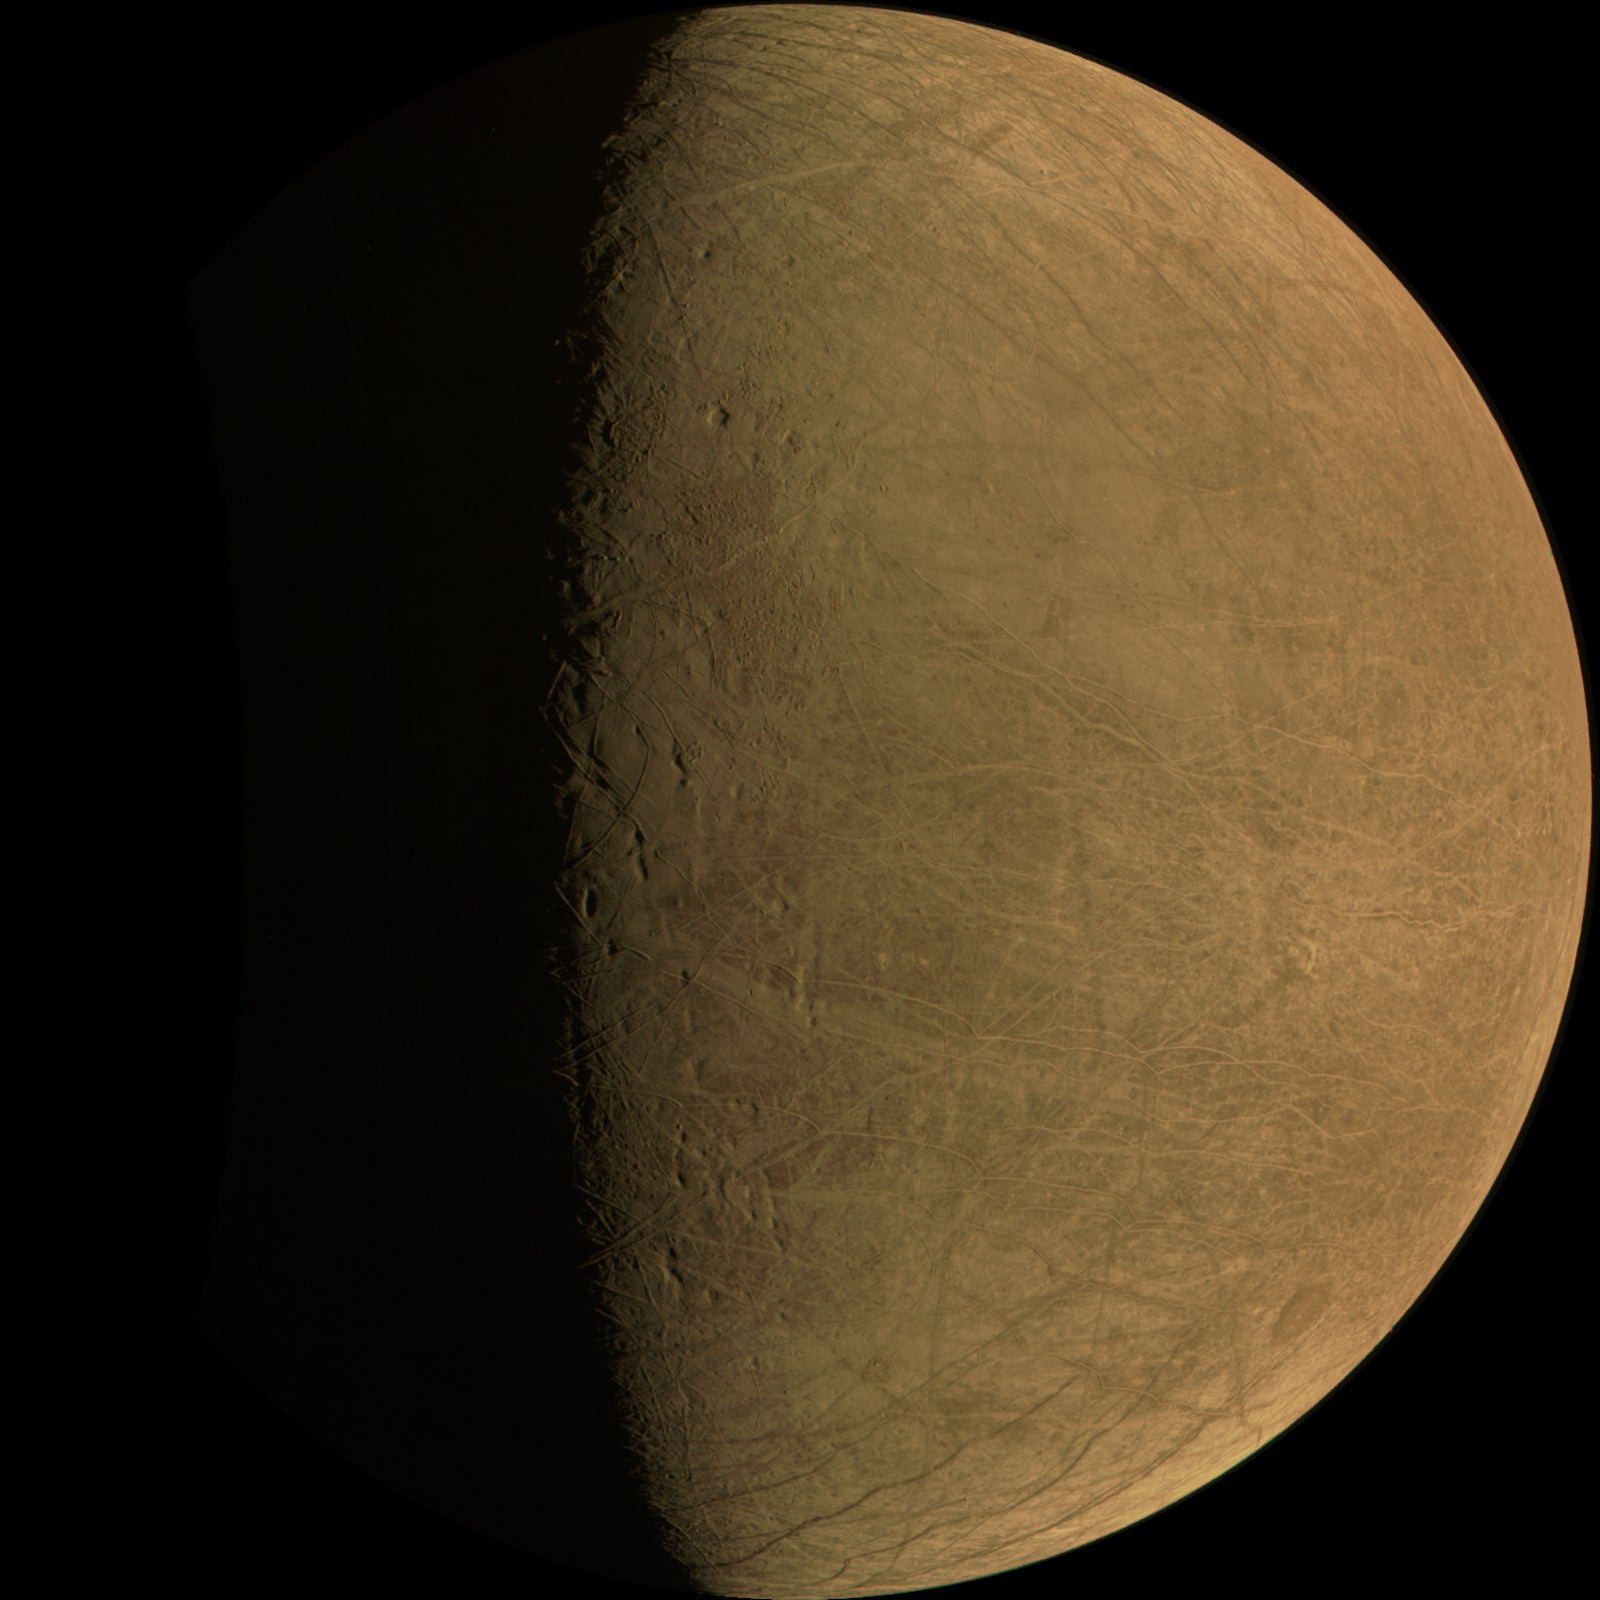 One of the four unprocessed images of Europa’s surface taken by the Juno probe. The moon appears uniformly pale orange because the camera’s color balance is optimized for Jupiter.